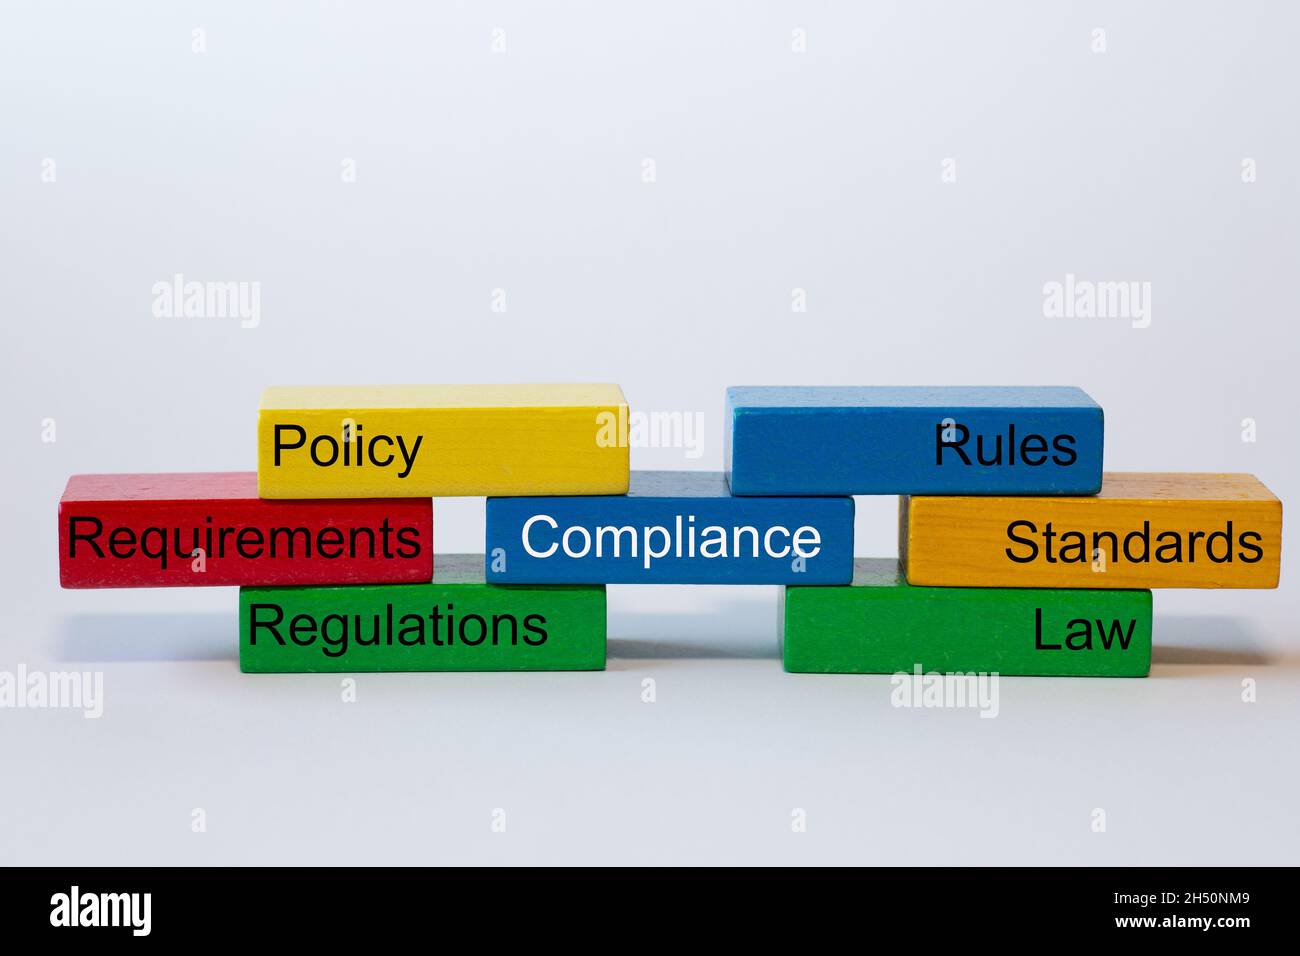 colorful blocks with the words: Compliance, Rules, Standards, Law. Regulations, Requirements, Policy, are isolated against a white background with spa Stock Photo